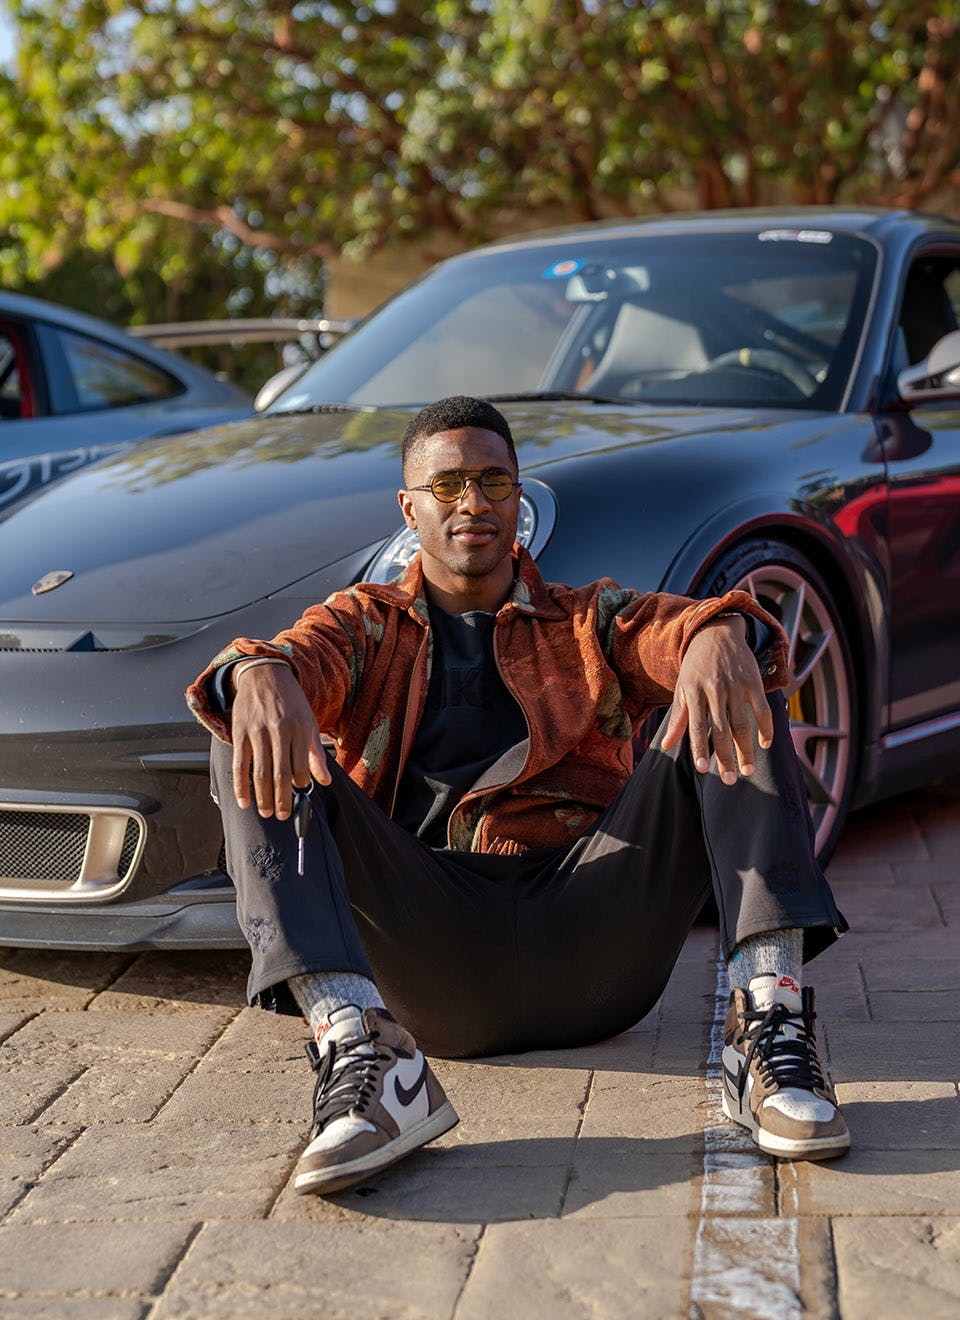 The professional American Football players who love Porsche